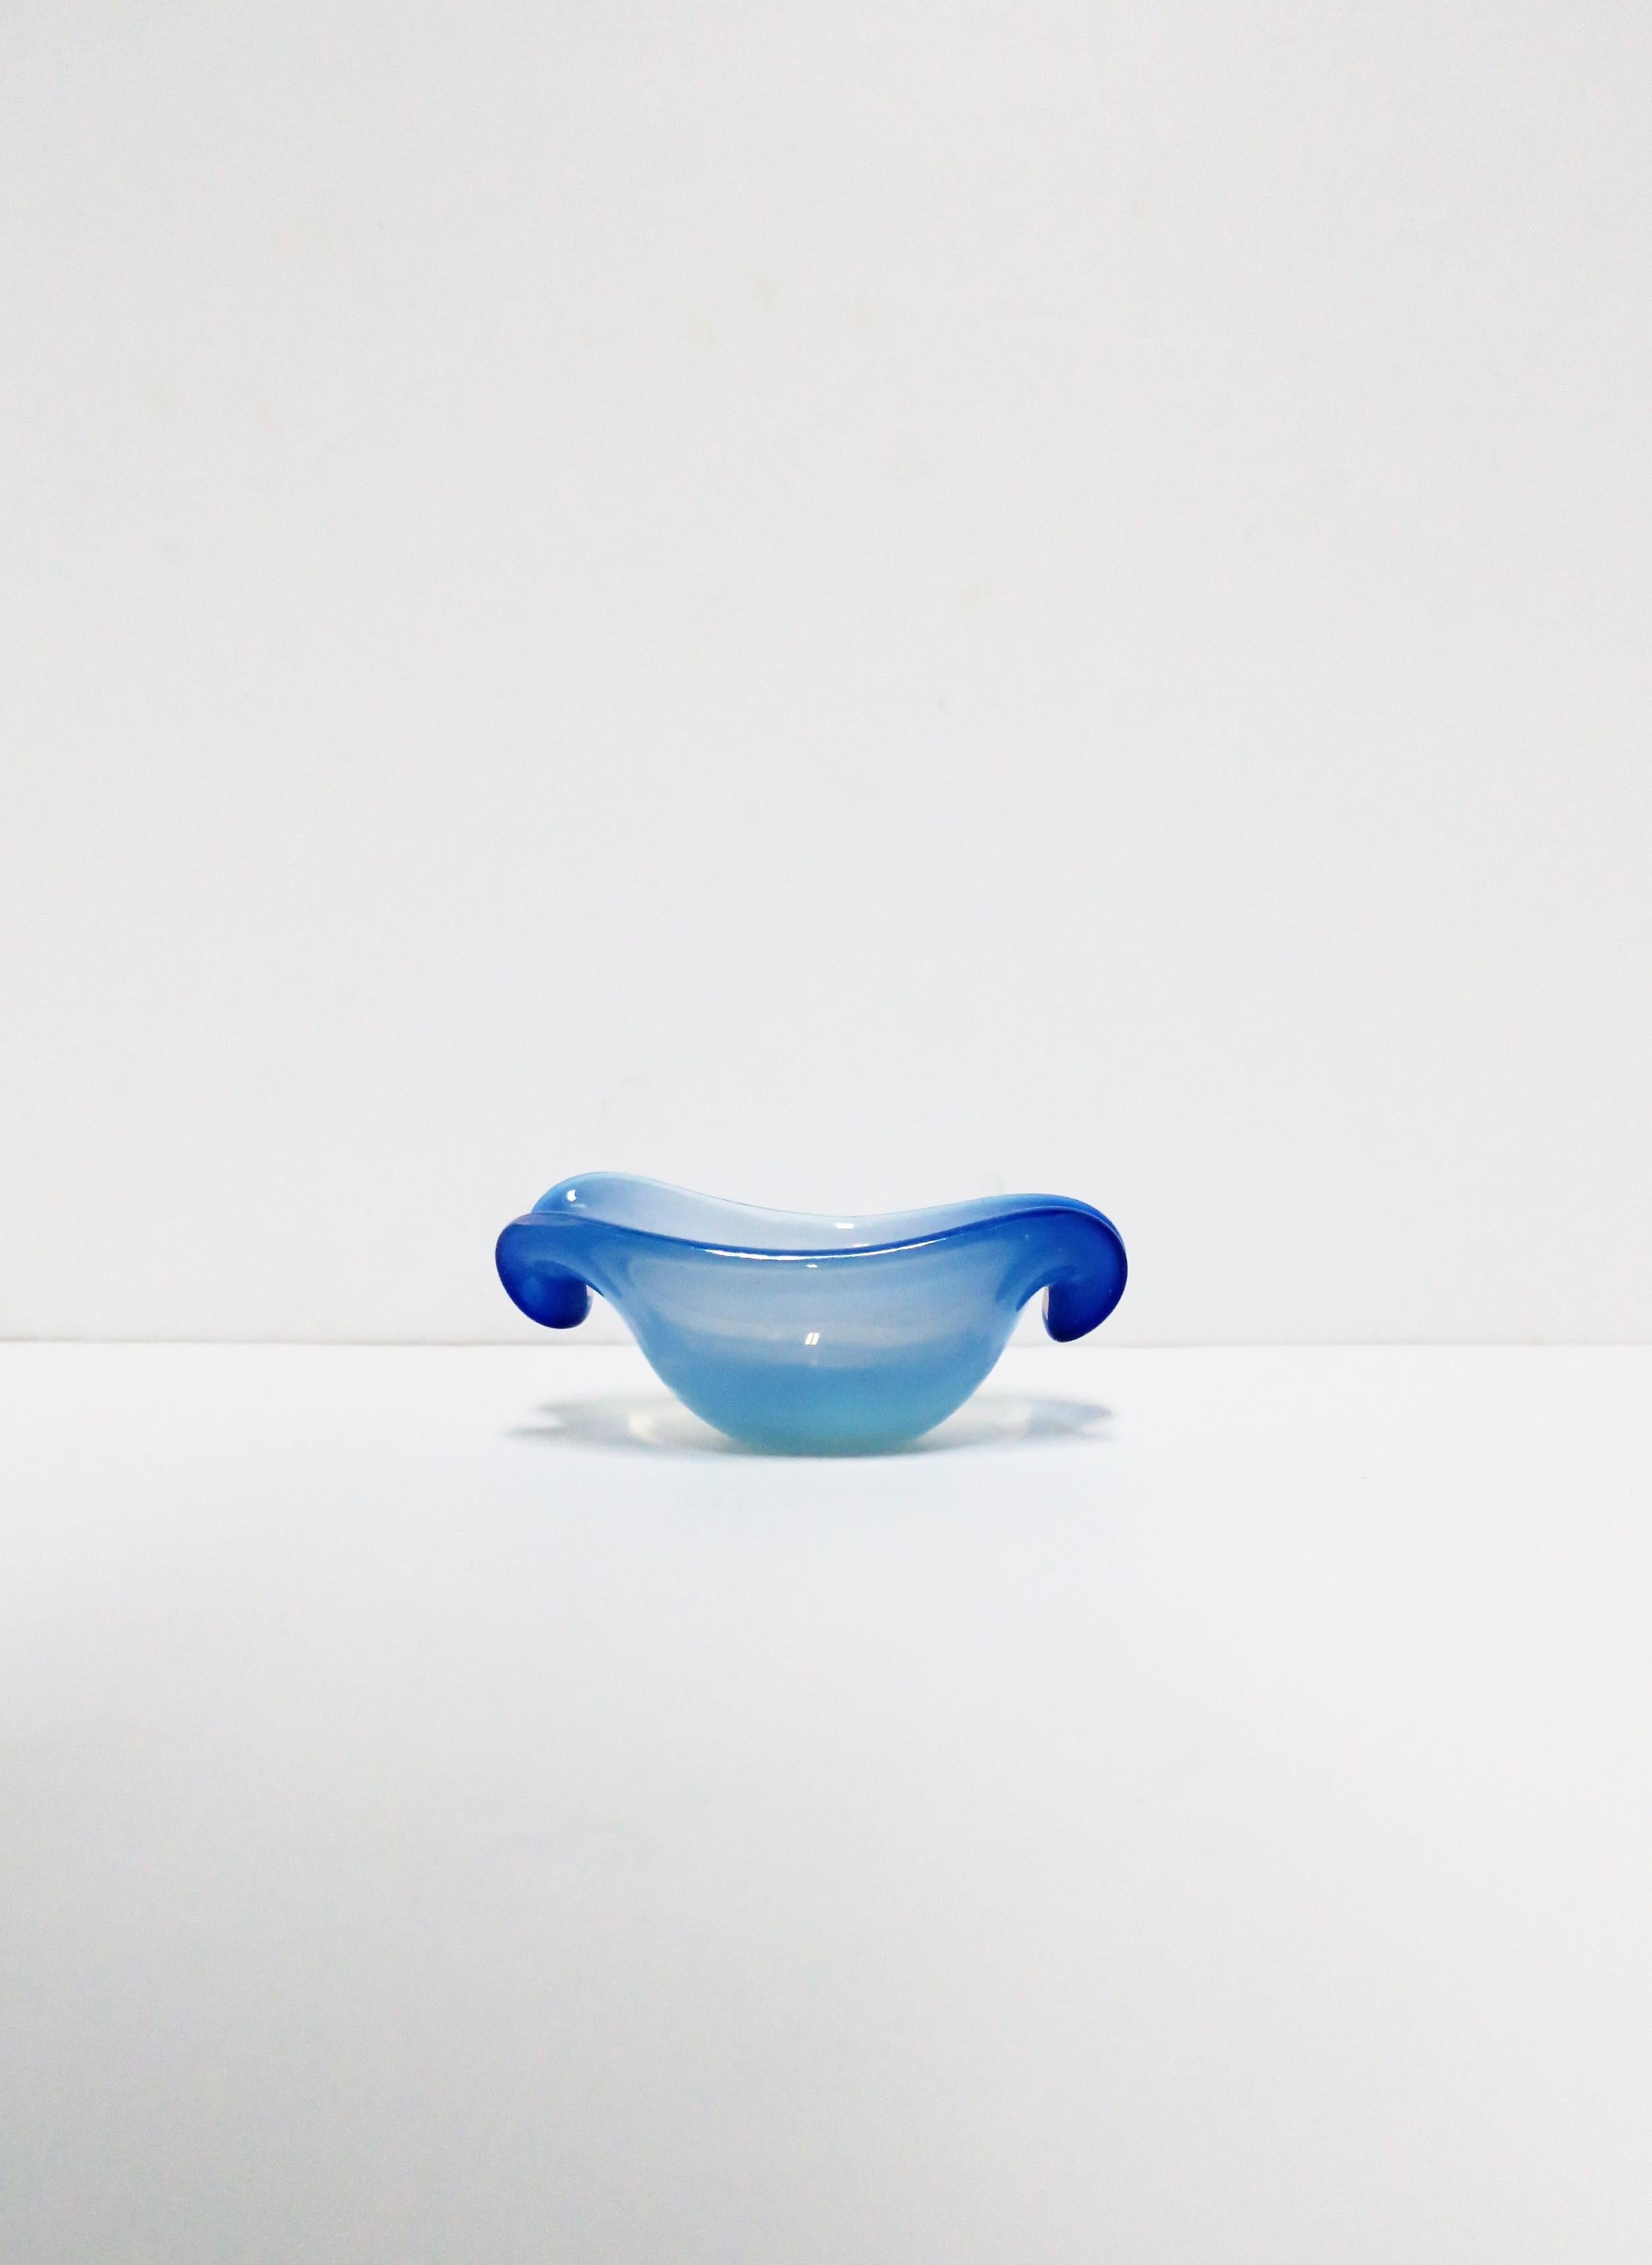 A modern Italian Murano blue opalescent oblong art glass bowl, circa mid-20th century, Italy. Great as a standalone piece, or as a small catch-all/vide-poche for jewelry. Dimensions: 2